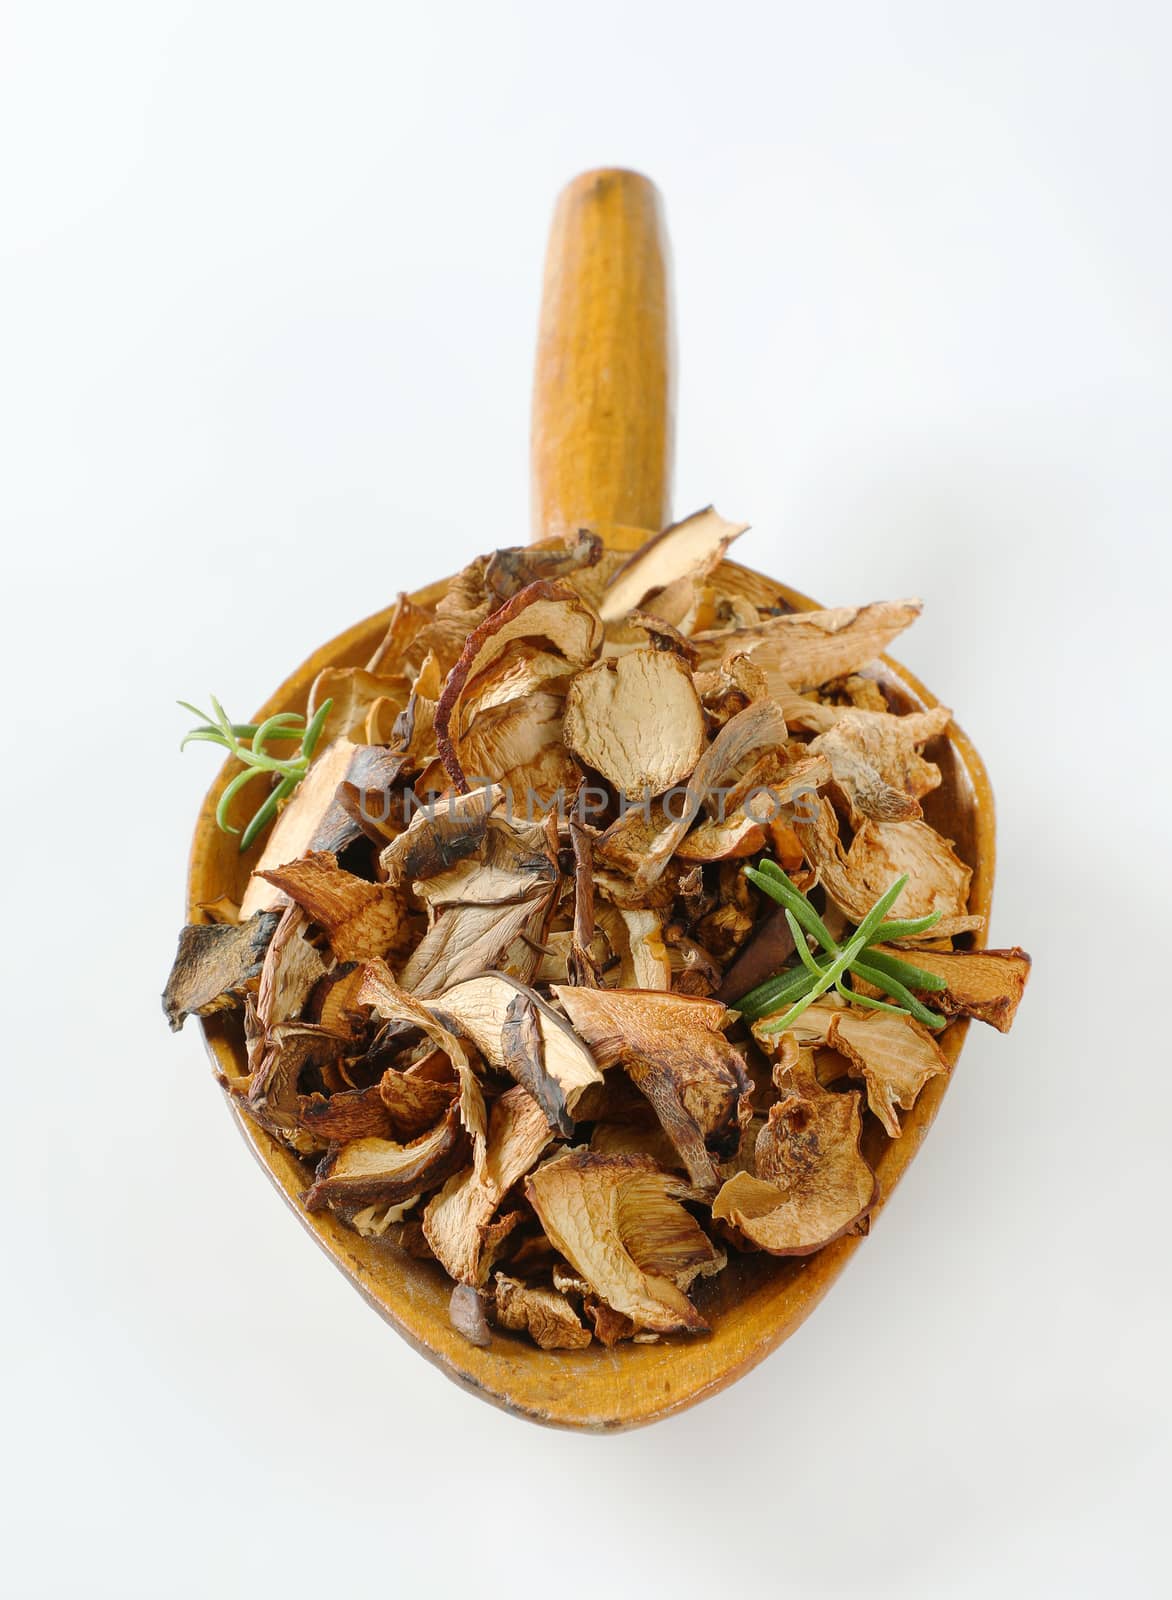 scoop of dried mushrooms on white background